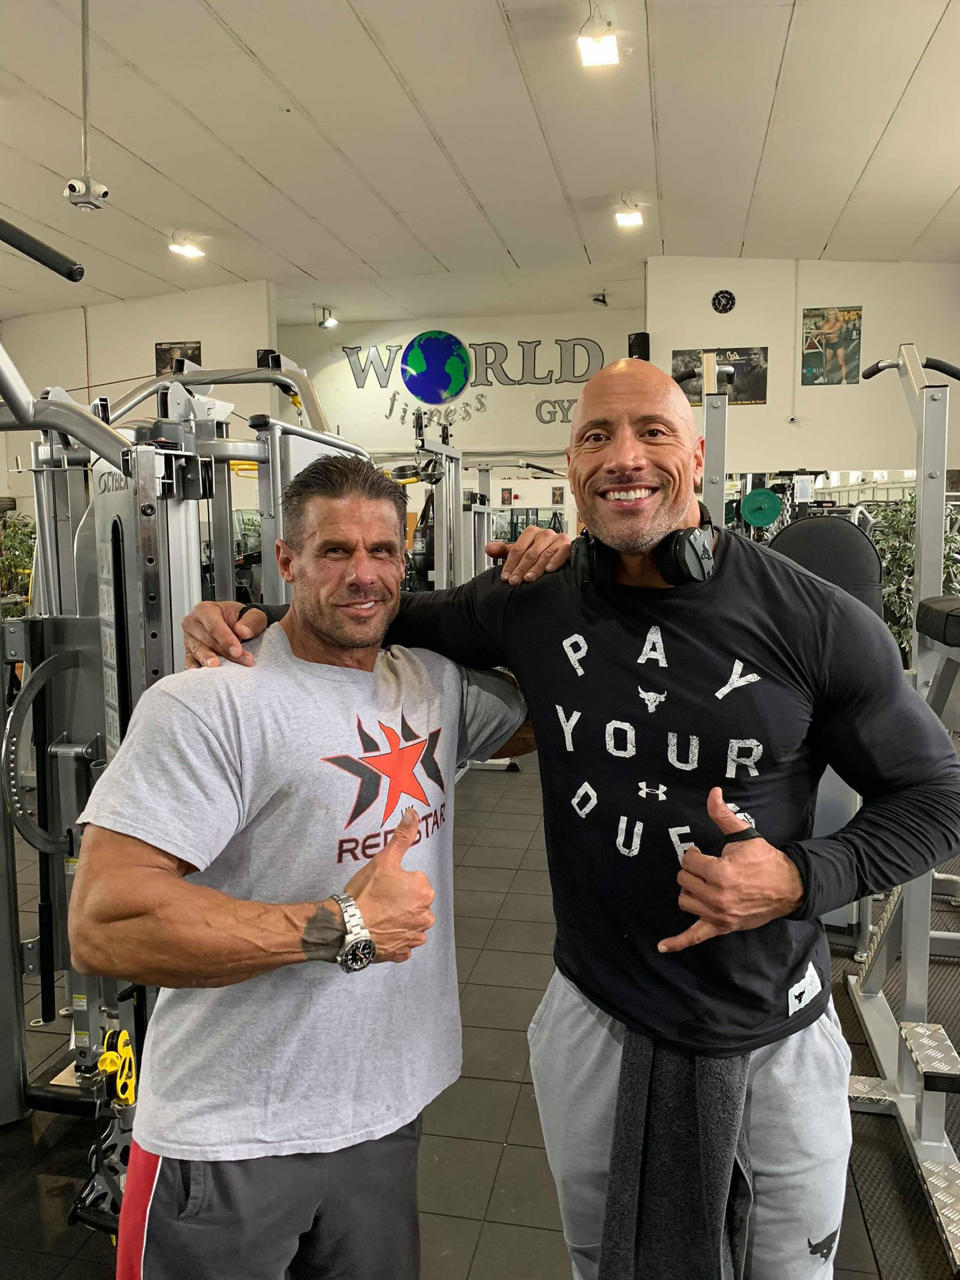 <p>The actor, real name Dwayne Johnson, surprised owner Craie Carrera when he dropped in at his Global Fitness Gym.</p>